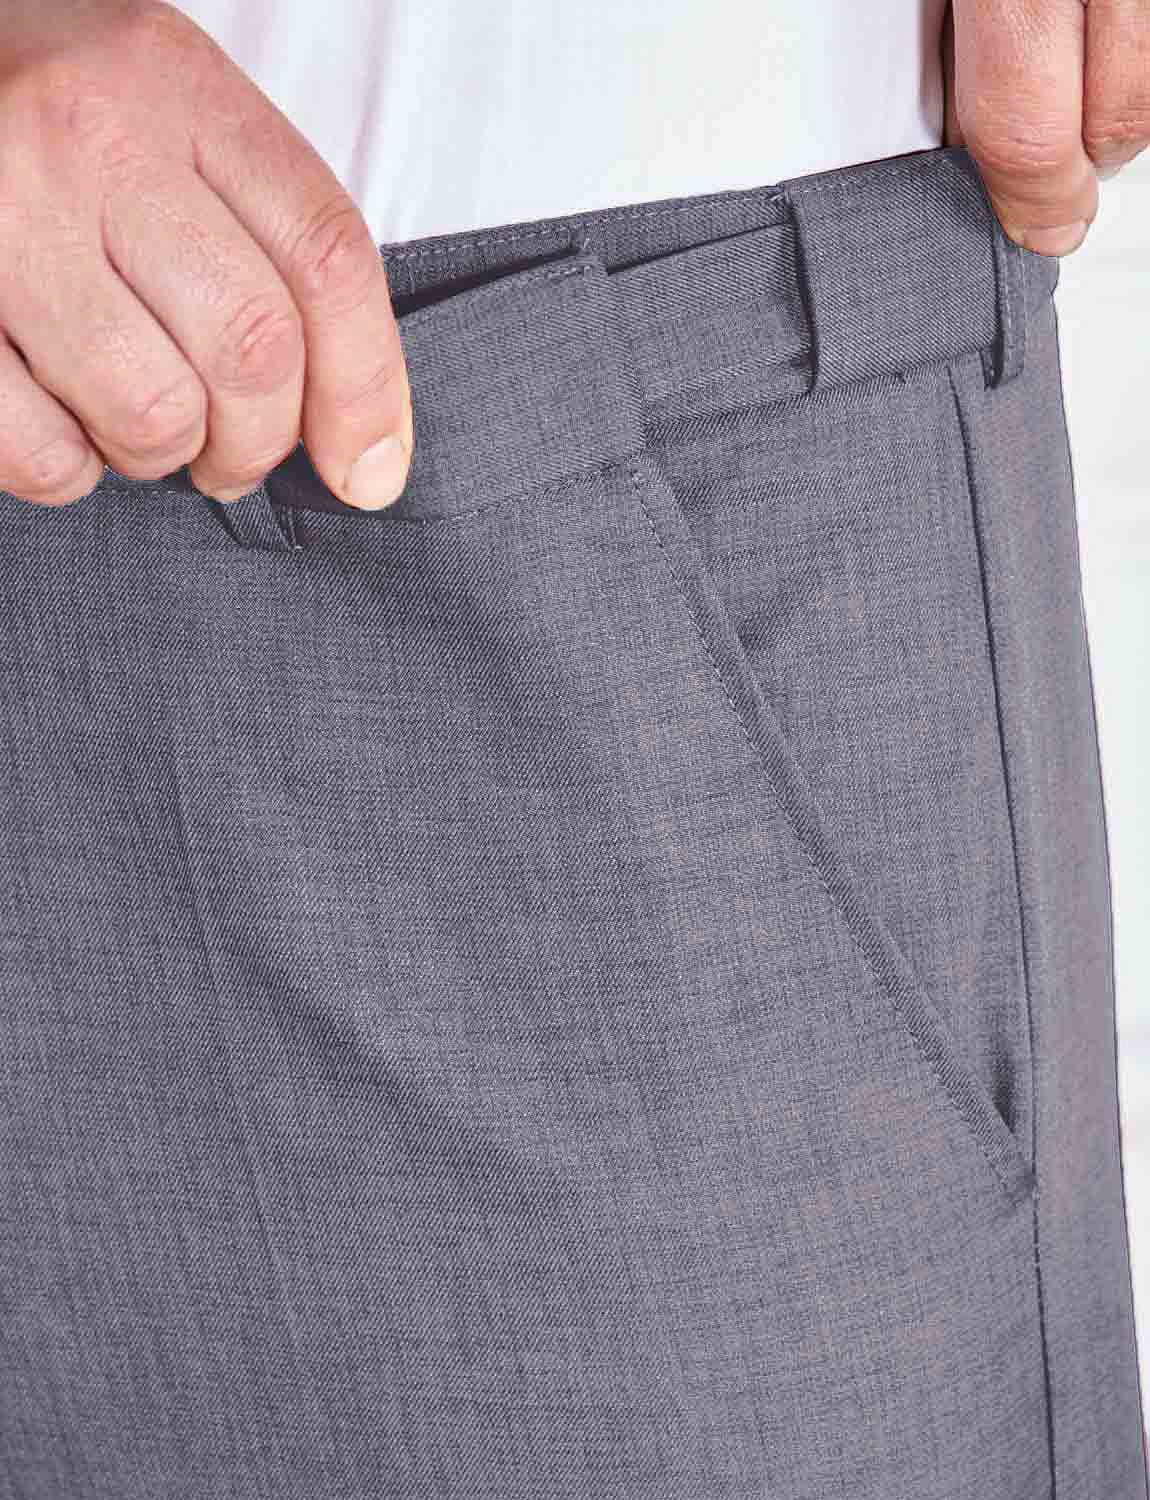 Firoji and Grey Color Mens Power Stretch Flexi Waist Trouser Lower Pants  for Comfortwear